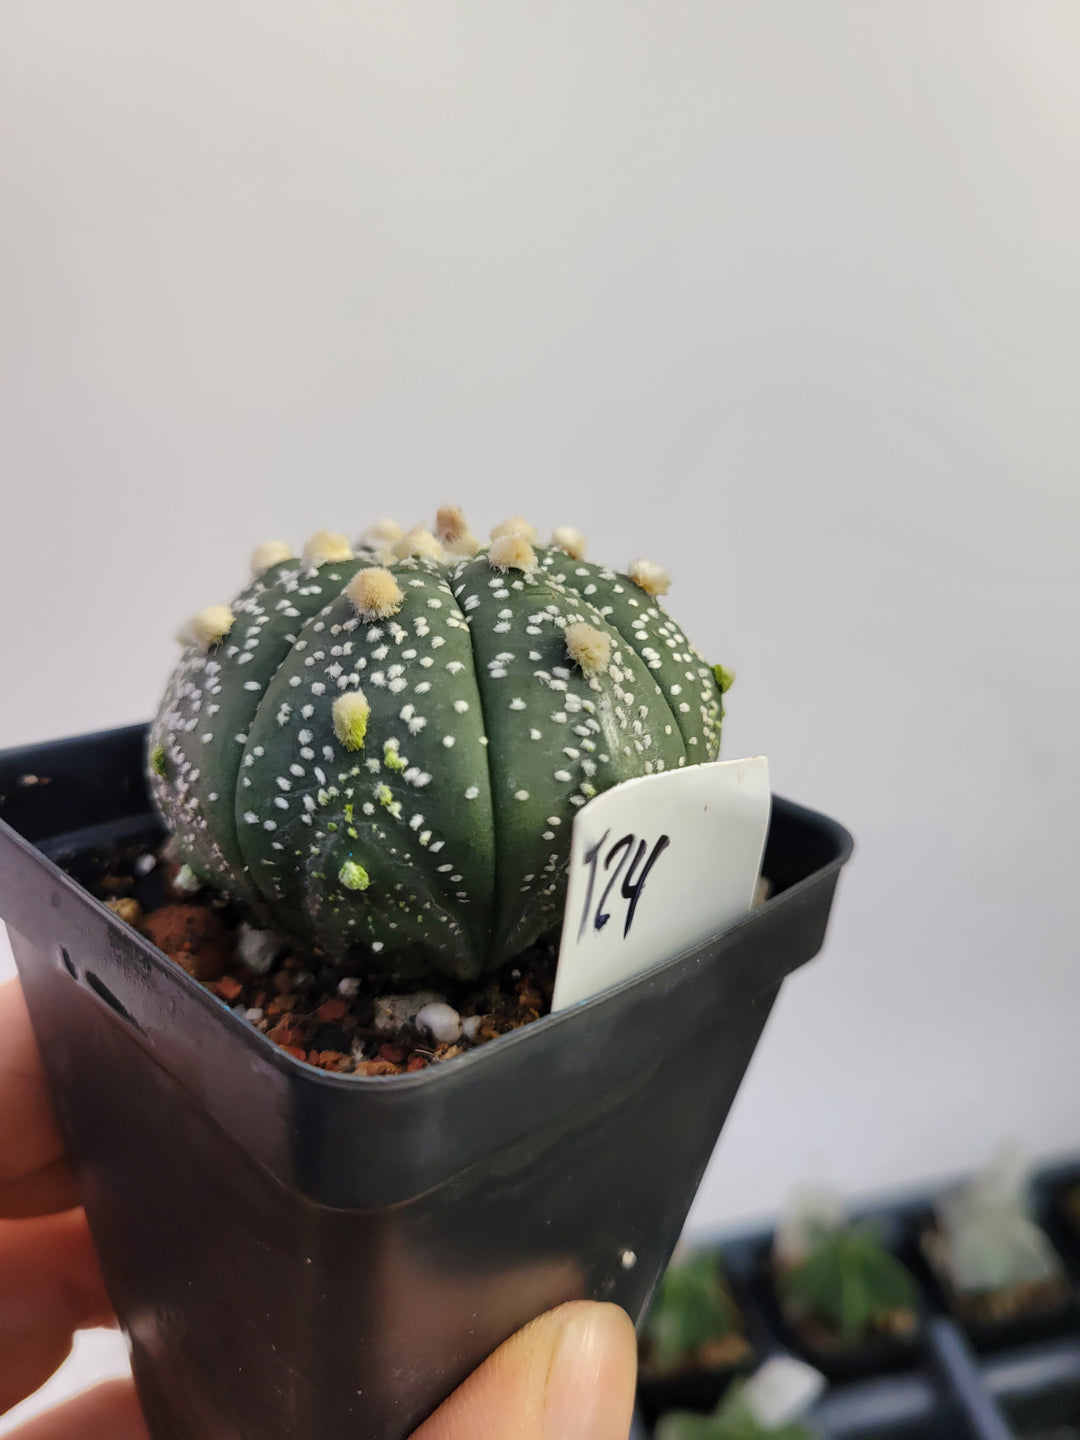 Astrophytum asterias cv. Superkabuto, rooted and established Deaw Cactus- Flowering Seed Grown #T24 - Nice Plants Good Pots